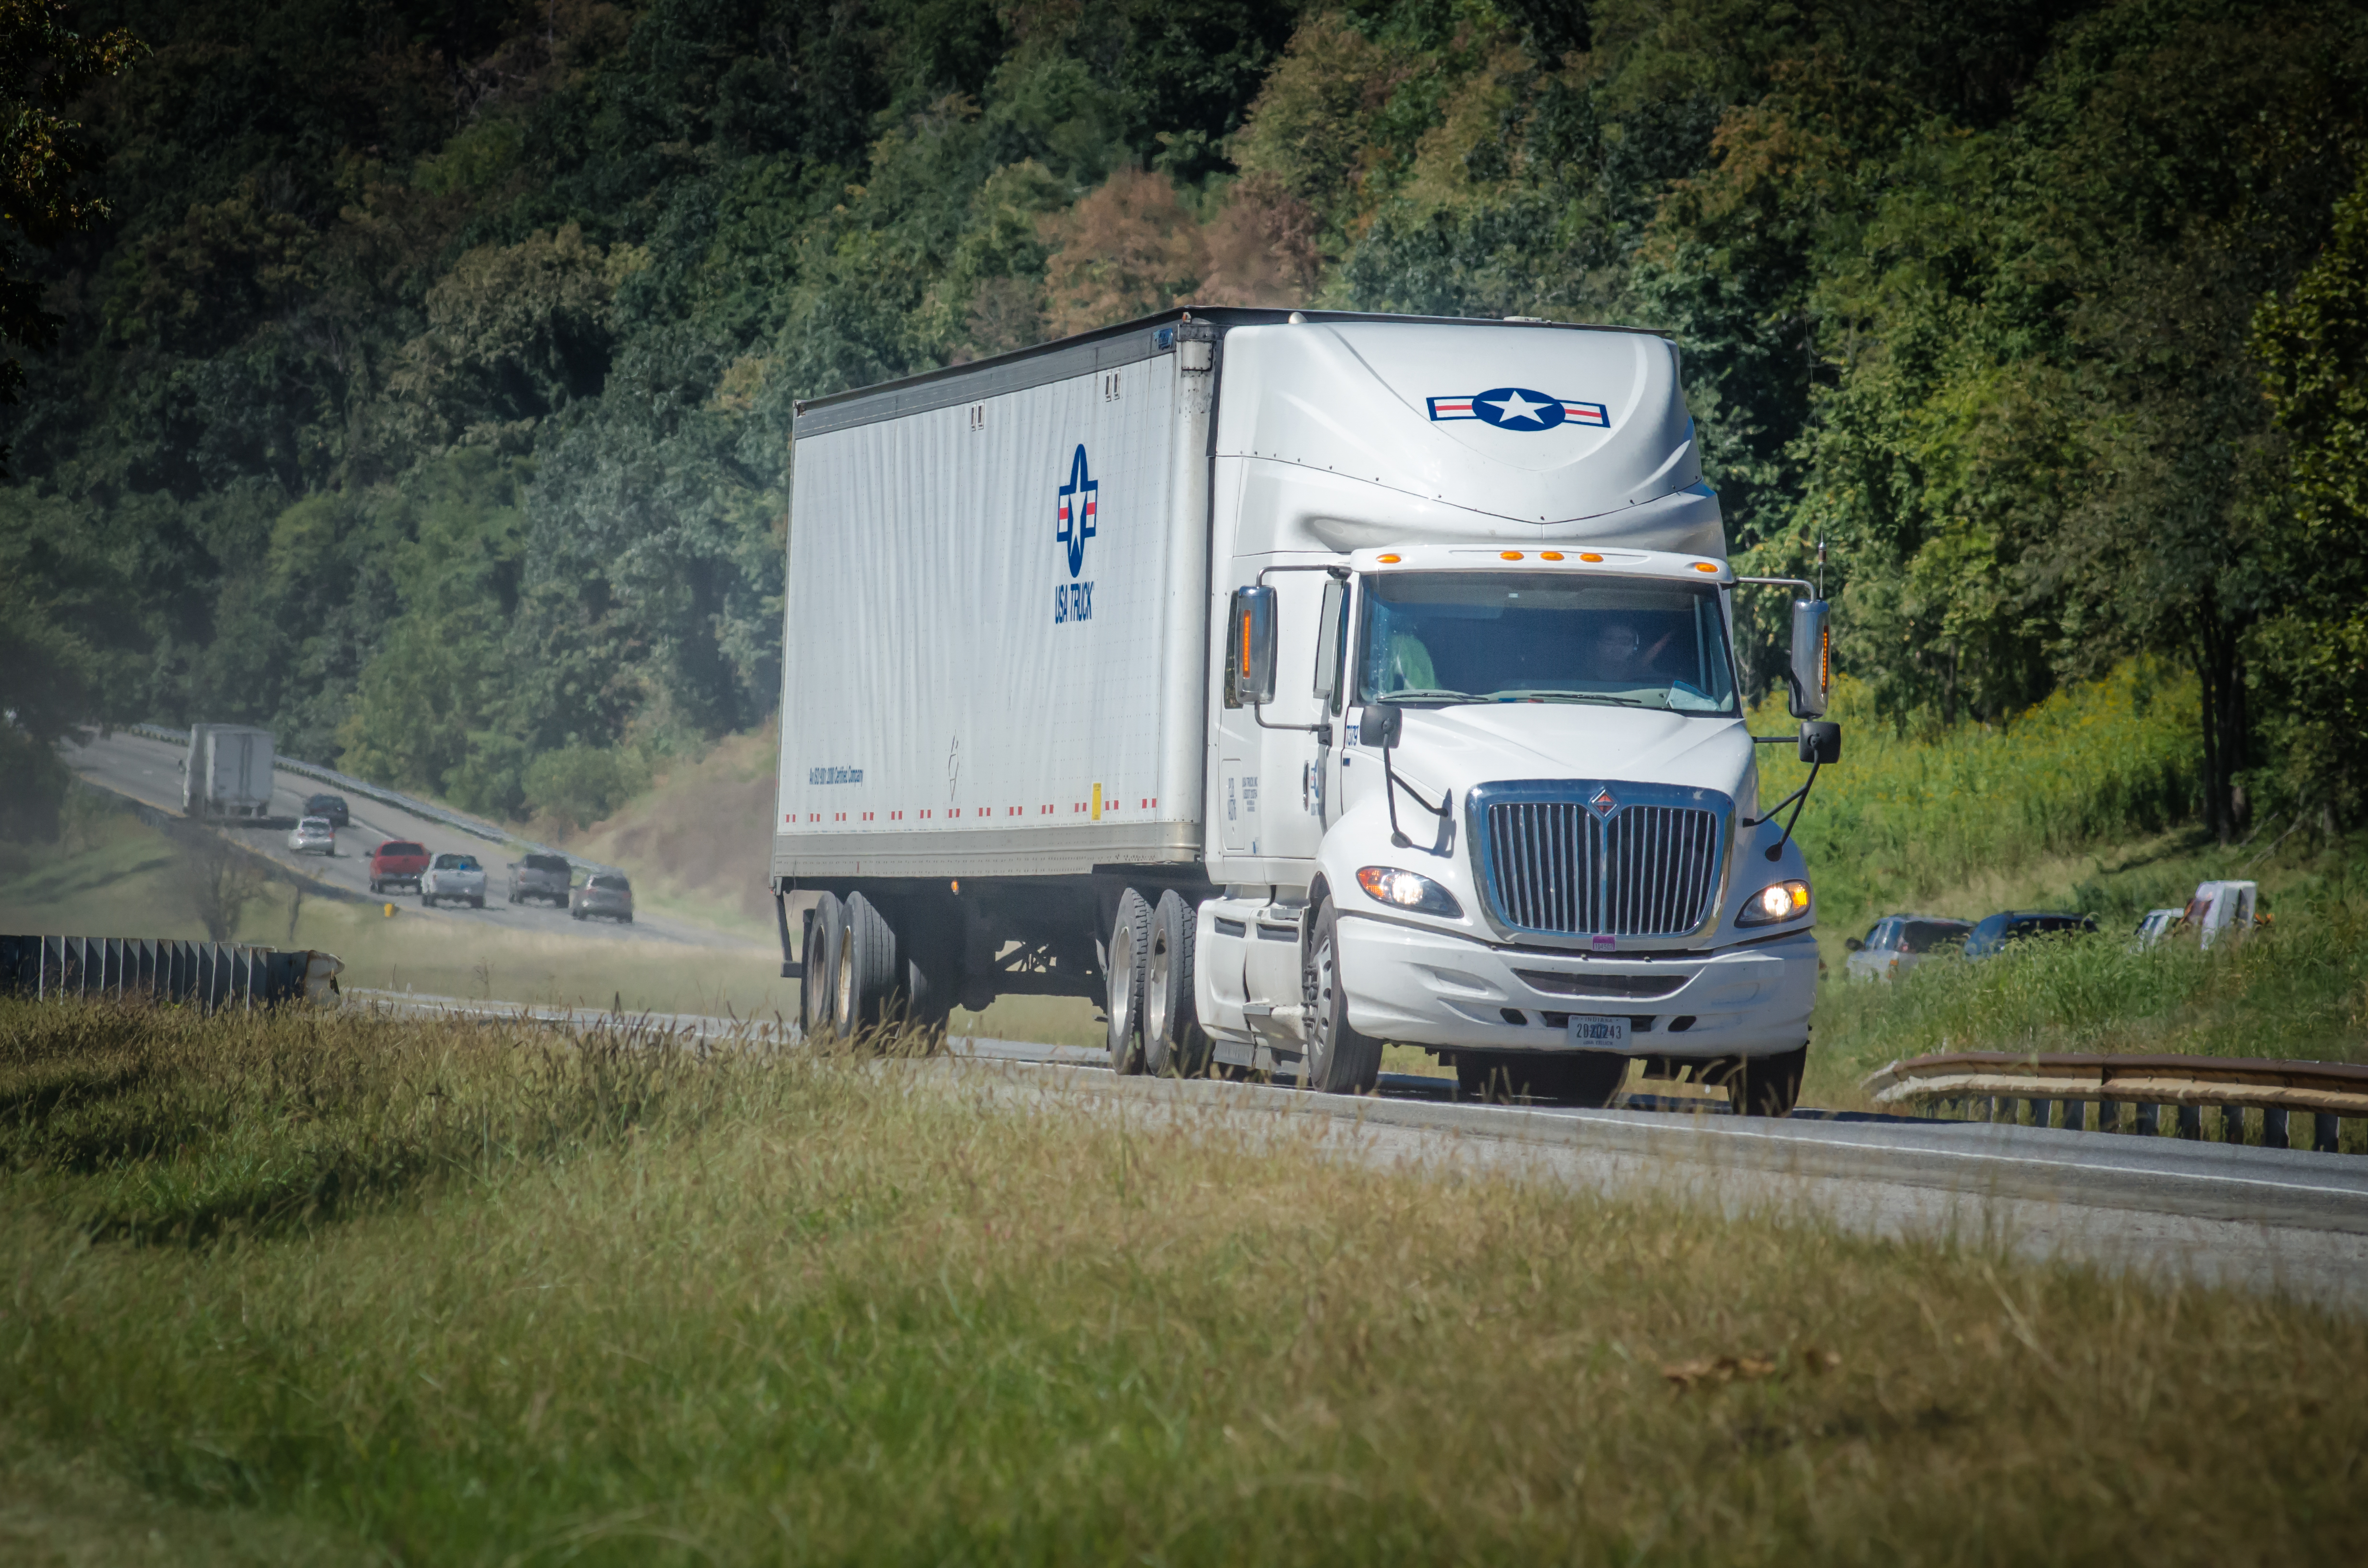 Driver recruitment and retention remains key for carriers